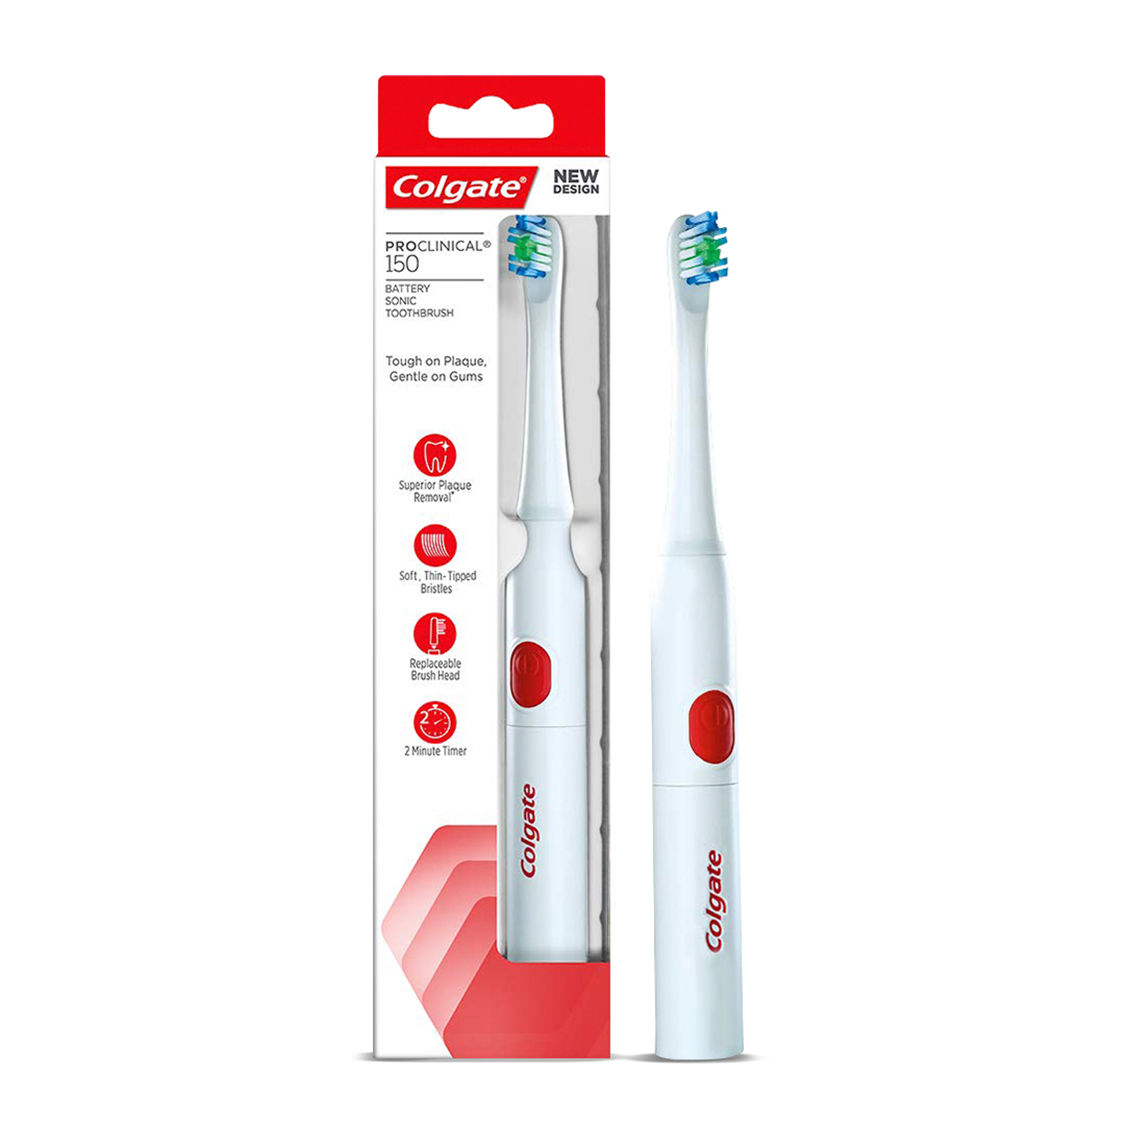 Buy Colgate Proclinical 150 Battery Sonic Electric Toothbrush, 1 Count Online